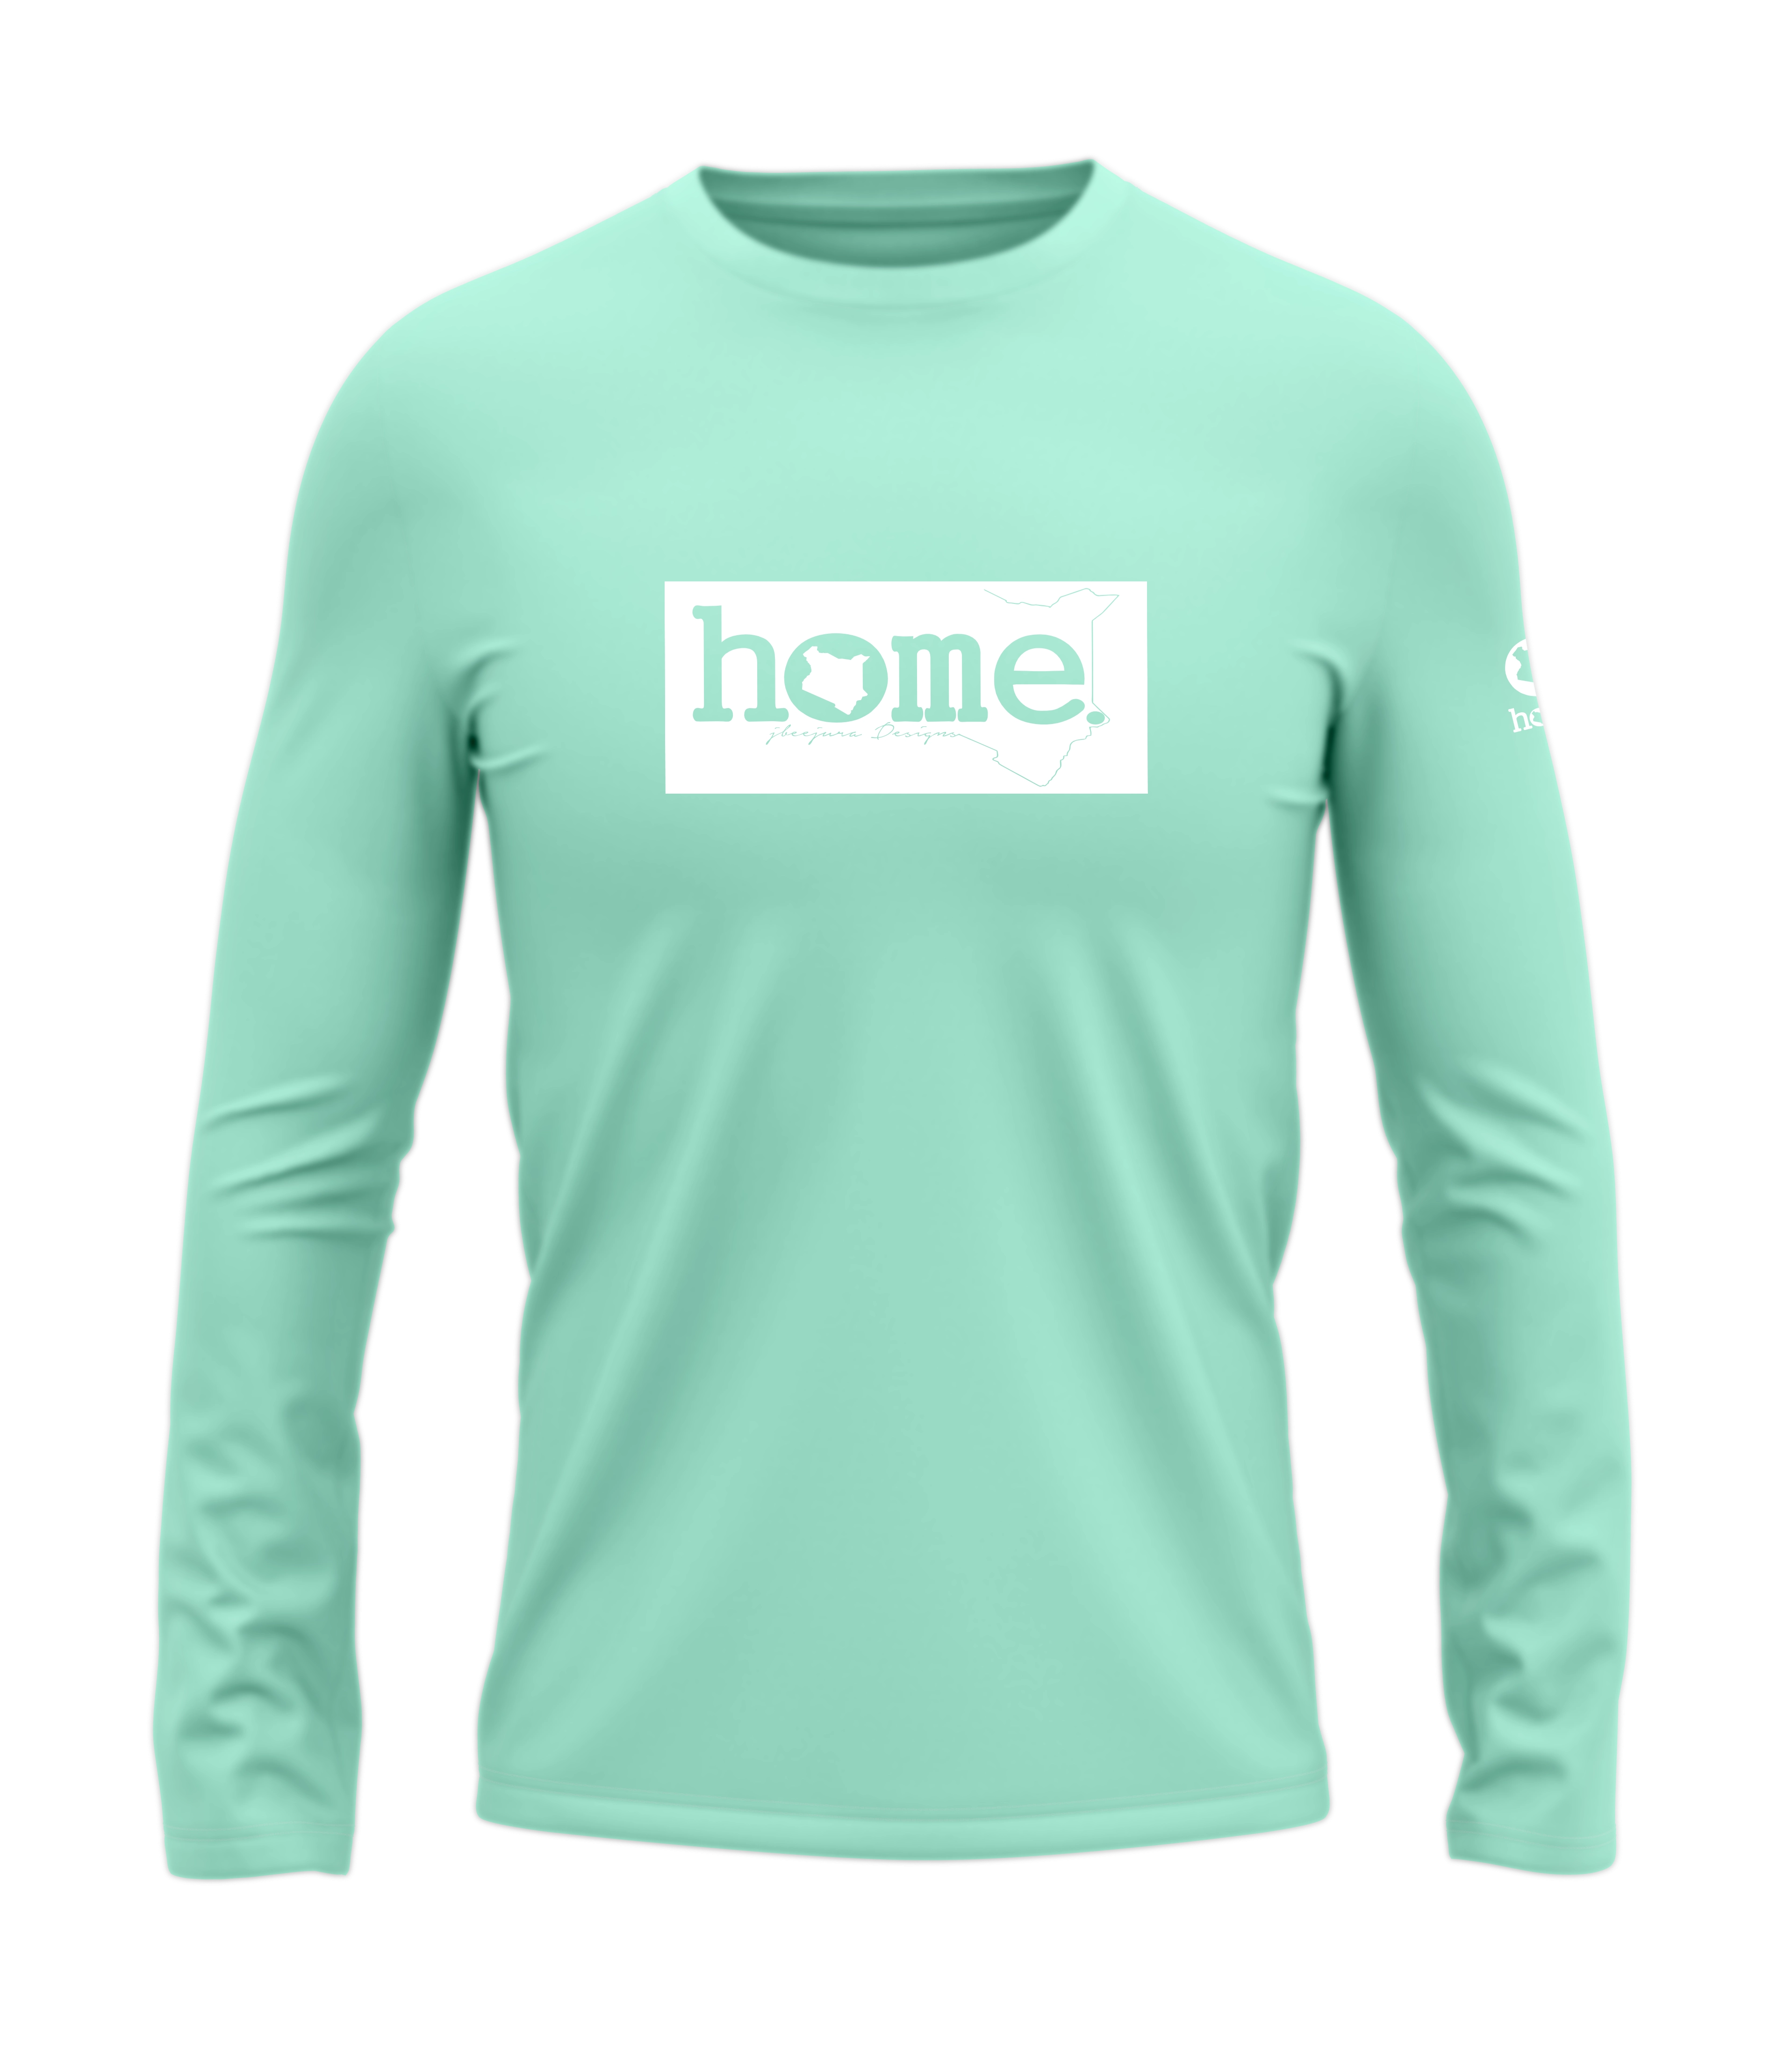 home_254 LONG-SLEEVED TURQUOISE GREEN T-SHIRT WITH A WHITE CLASSIC PRINT – COTTON PLUS FABRIC